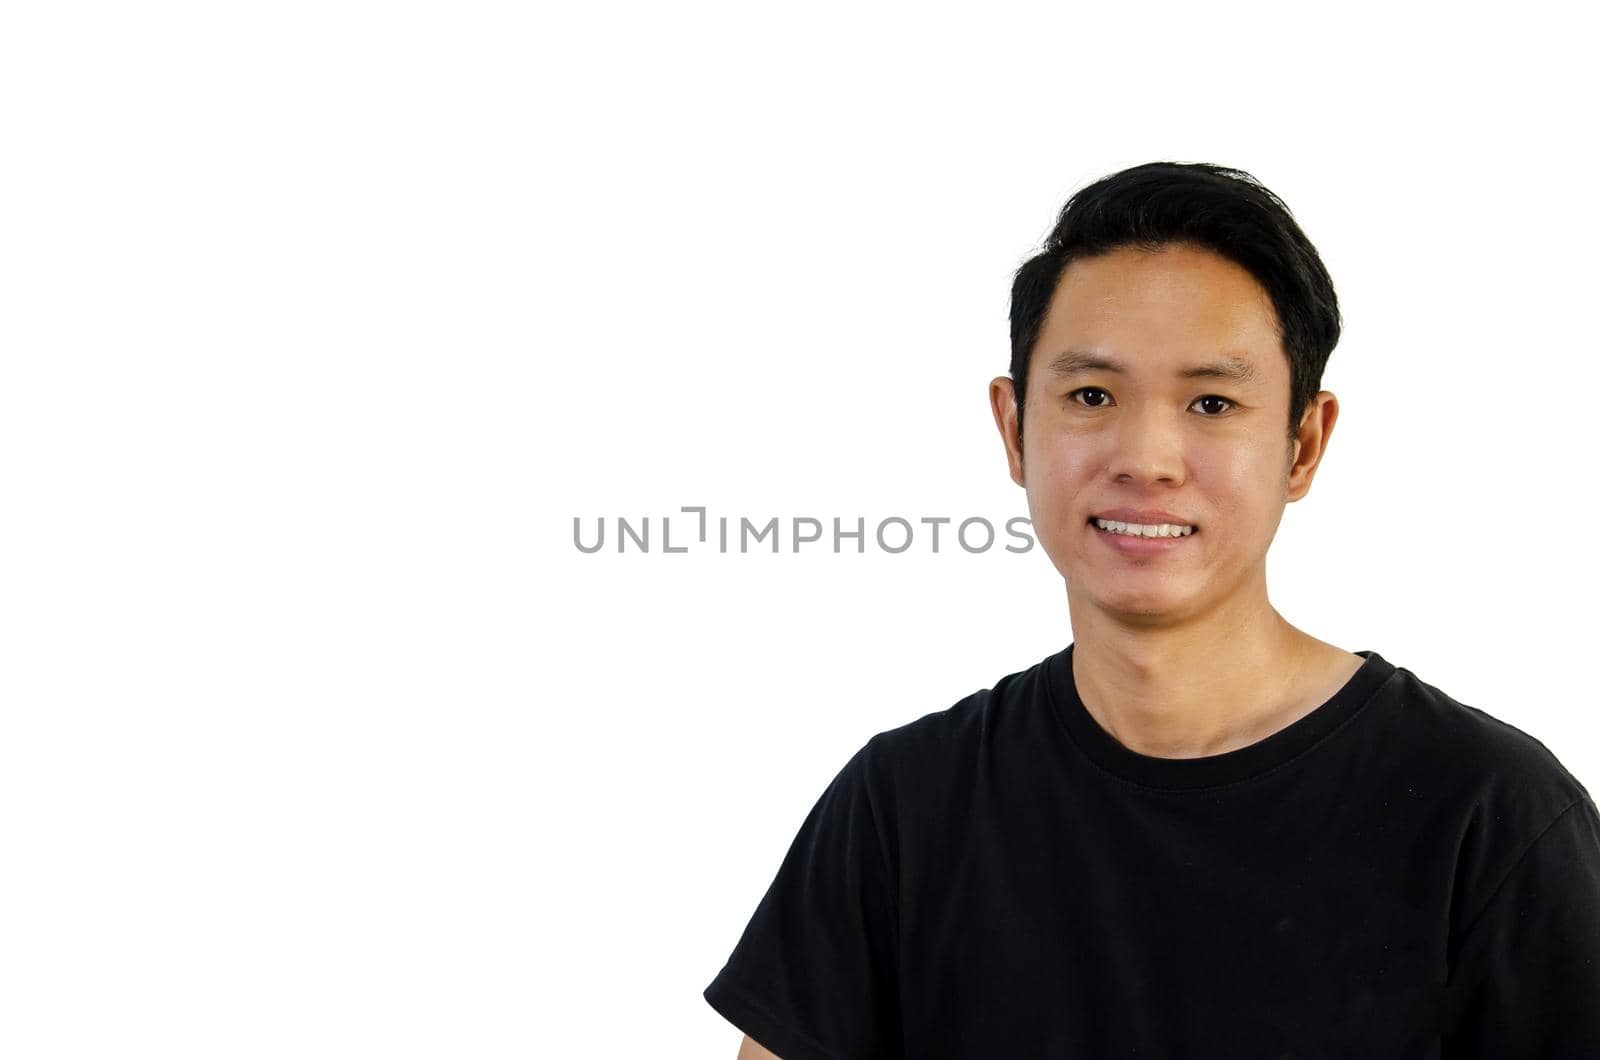 Asian man wearing black t-shirt smiling showing teeth on white background. by aoo3771